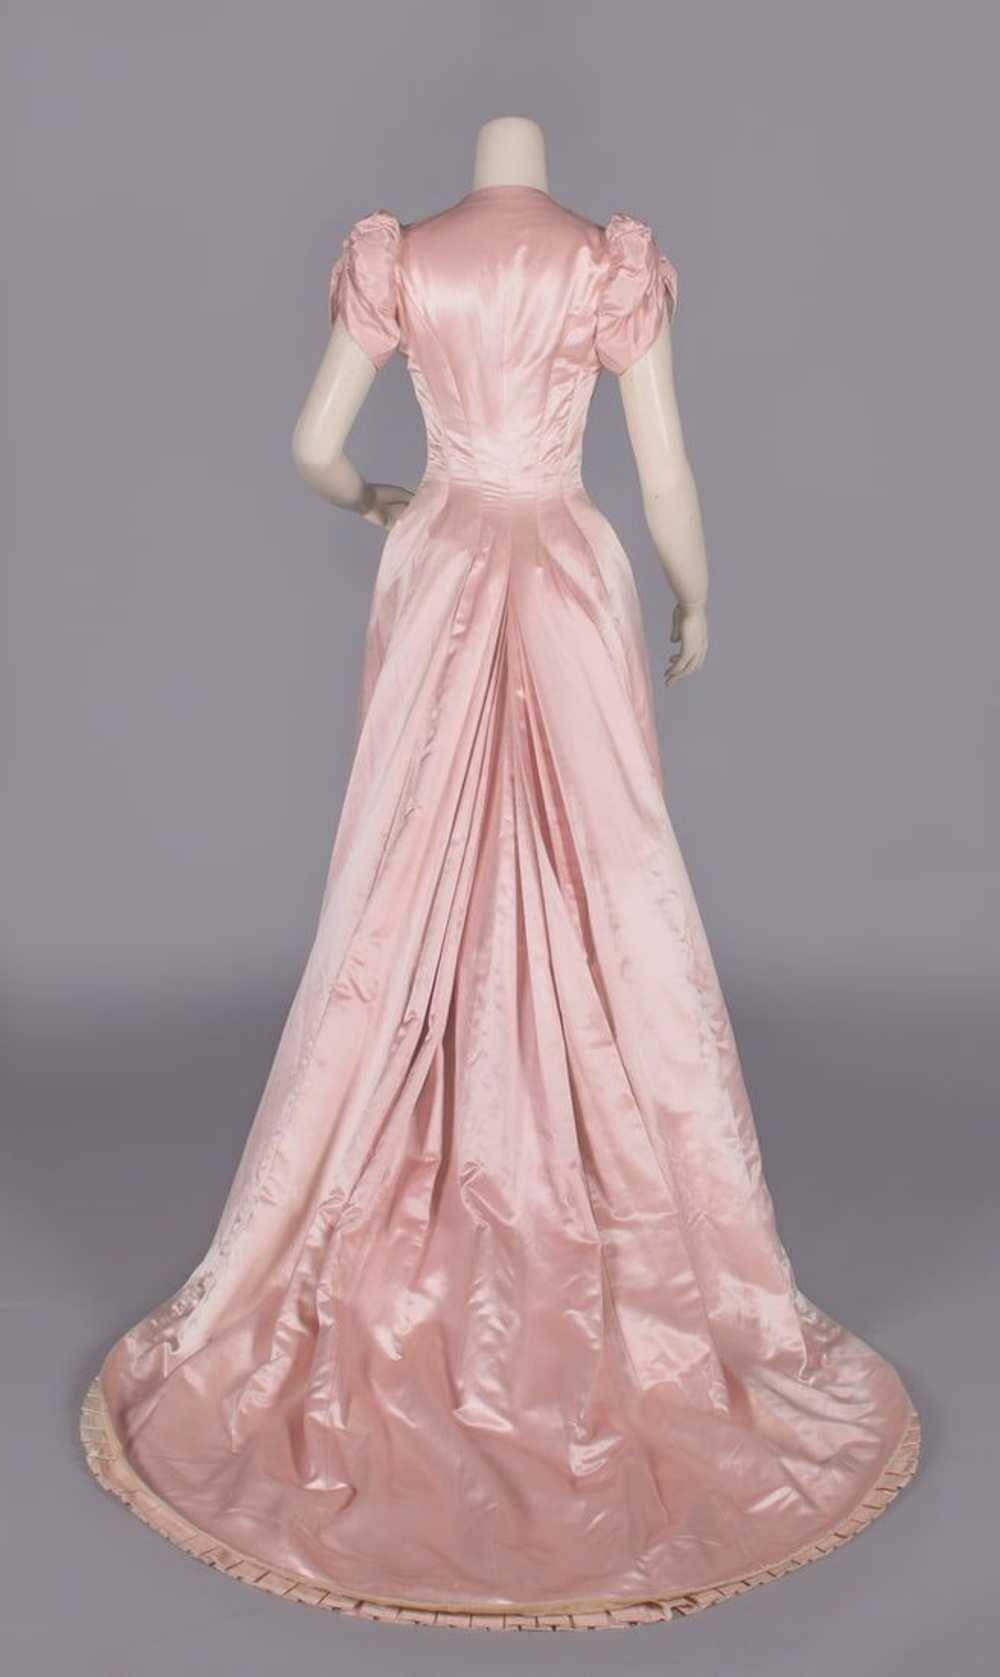 BLUSH PINK SILK SATIN EVENING GOWN, LATE 1880s - image 4